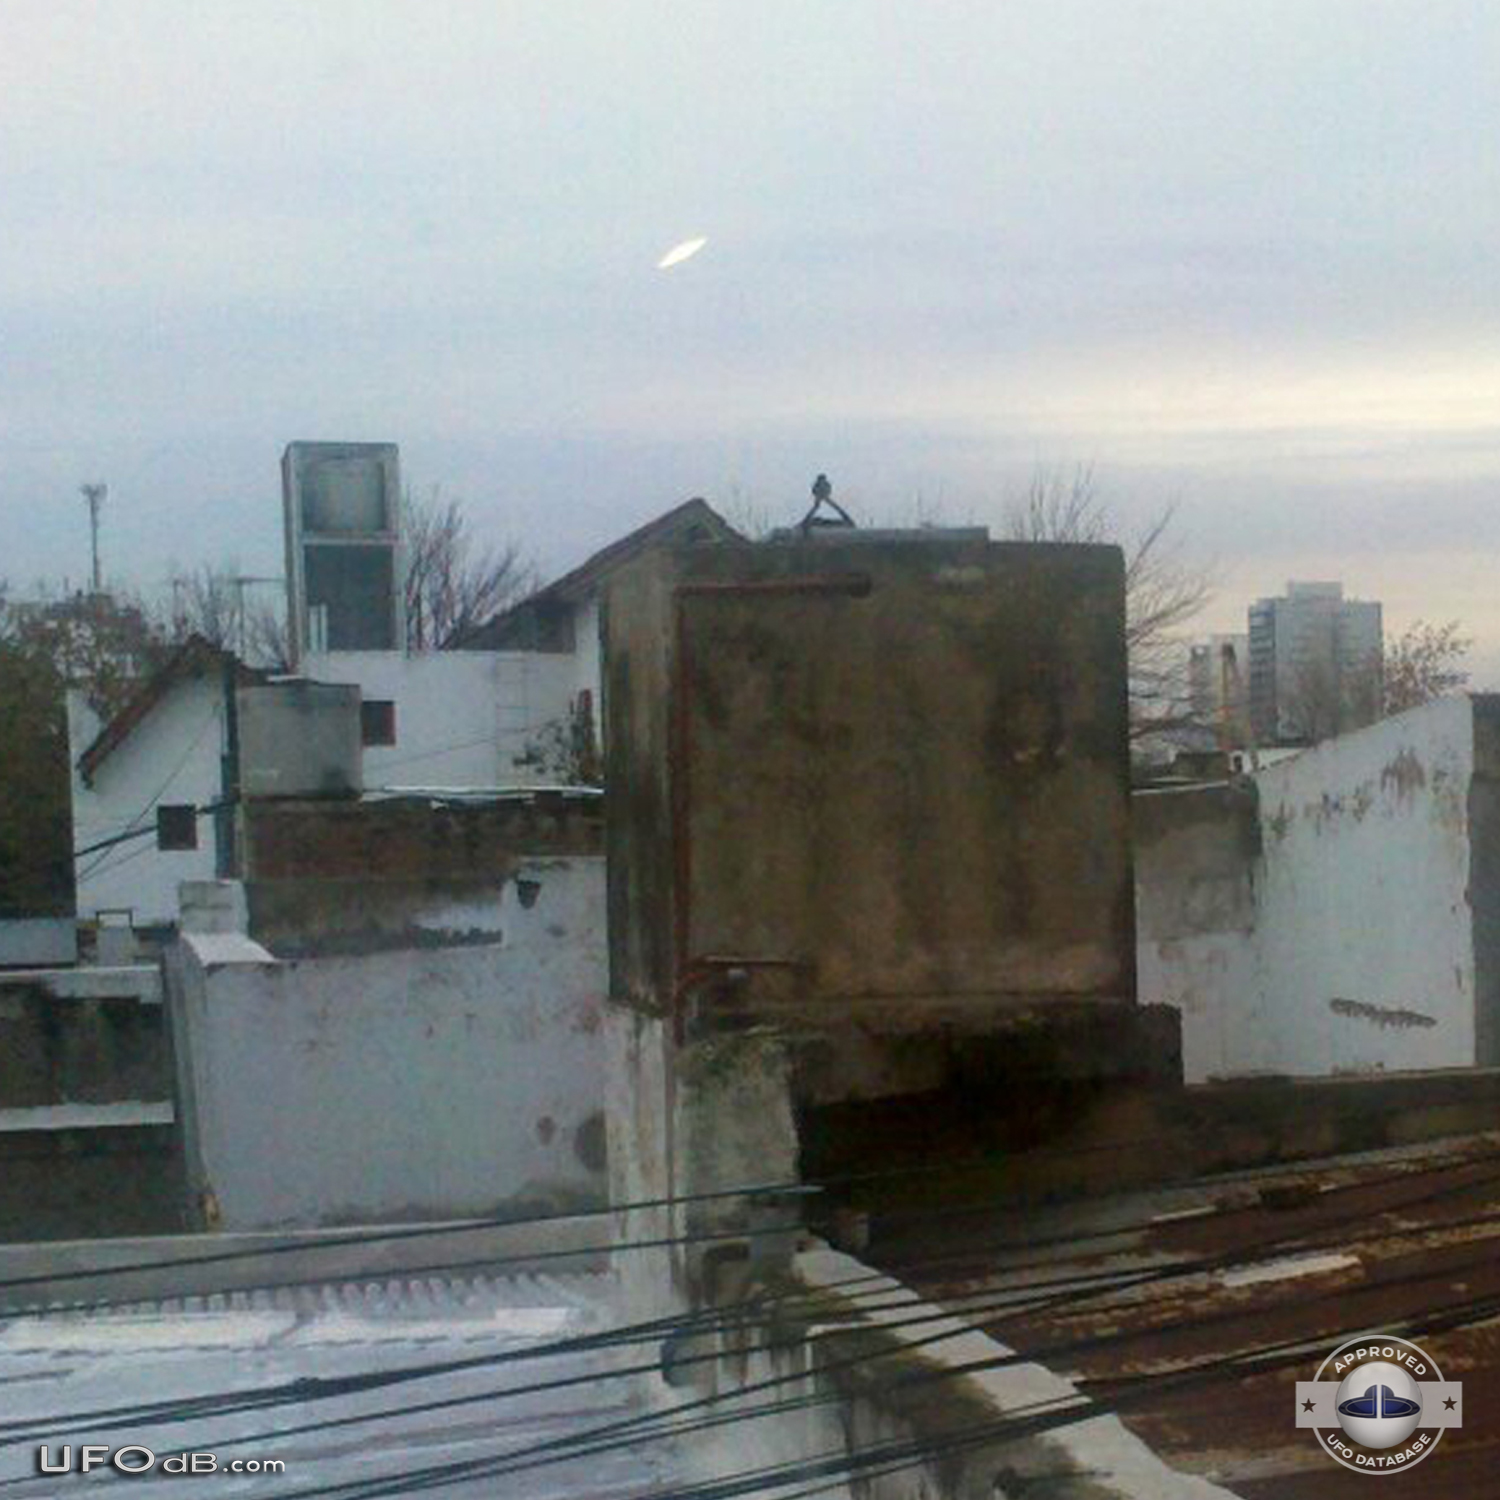 White Saucer UFO caught on photo in Bahia Blanca, Buenos Aires - 2012 UFO Picture #522-2